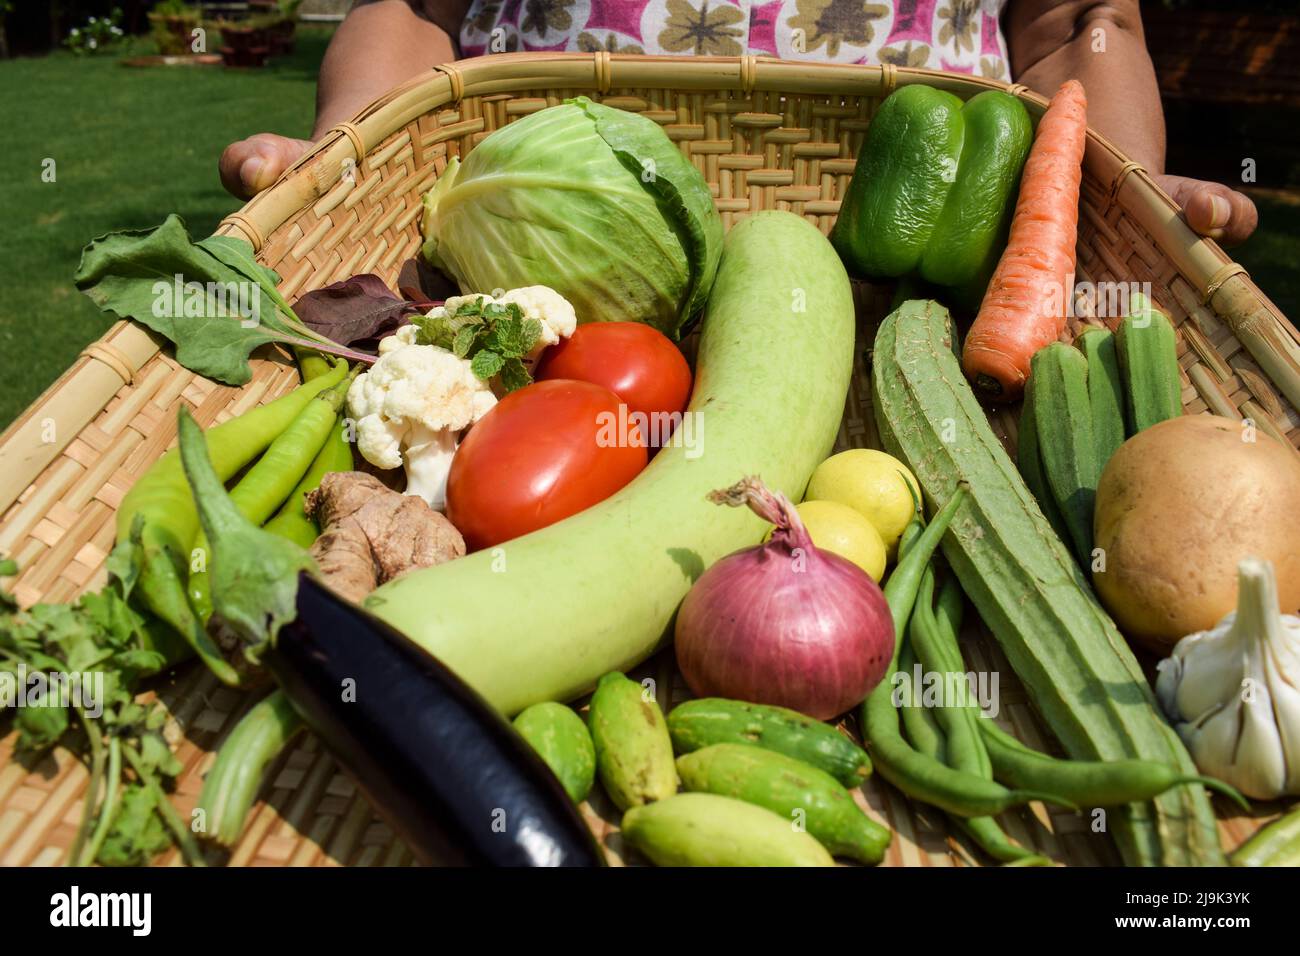 Female holding serving and Celebrating National Nutrition week observed in september. Farm fresh Organic mix vegetables. Variety of indian desi vegeta Stock Photo